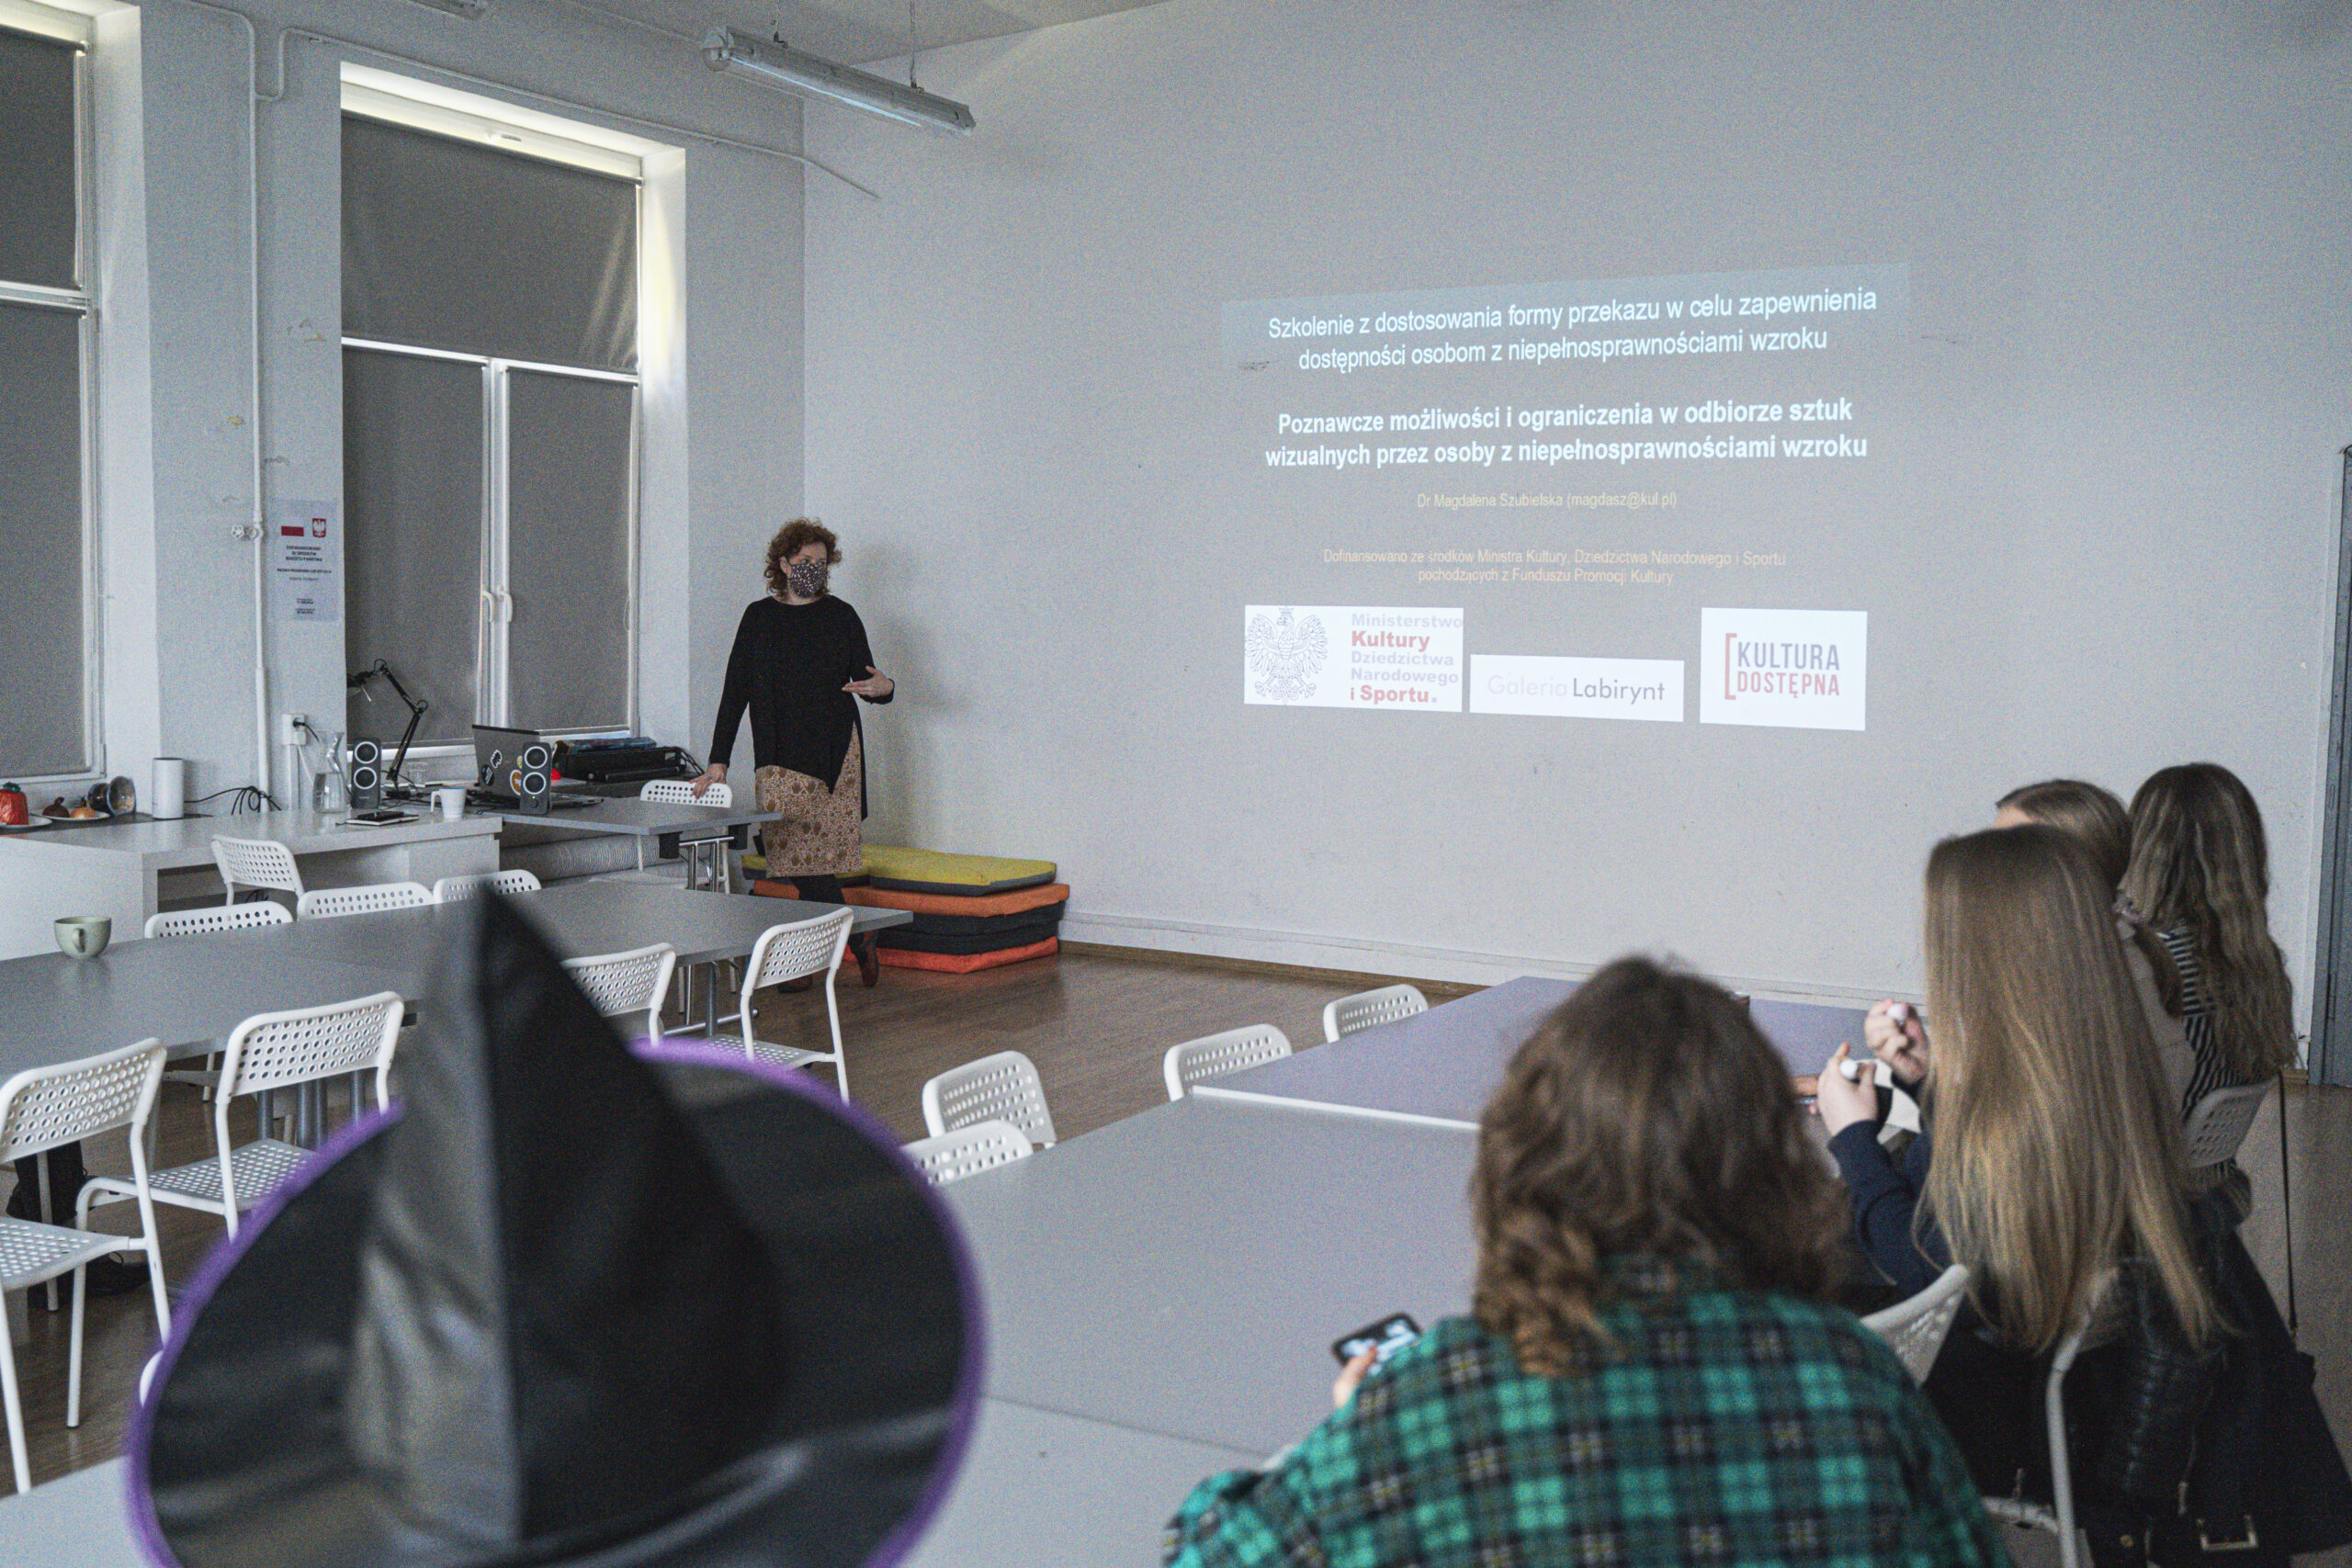 Training course in cognitive abilities and limitations in the reception of visual arts by people with visual impairments. Conducted by Magdalena Szubielska, PhD, October 2021